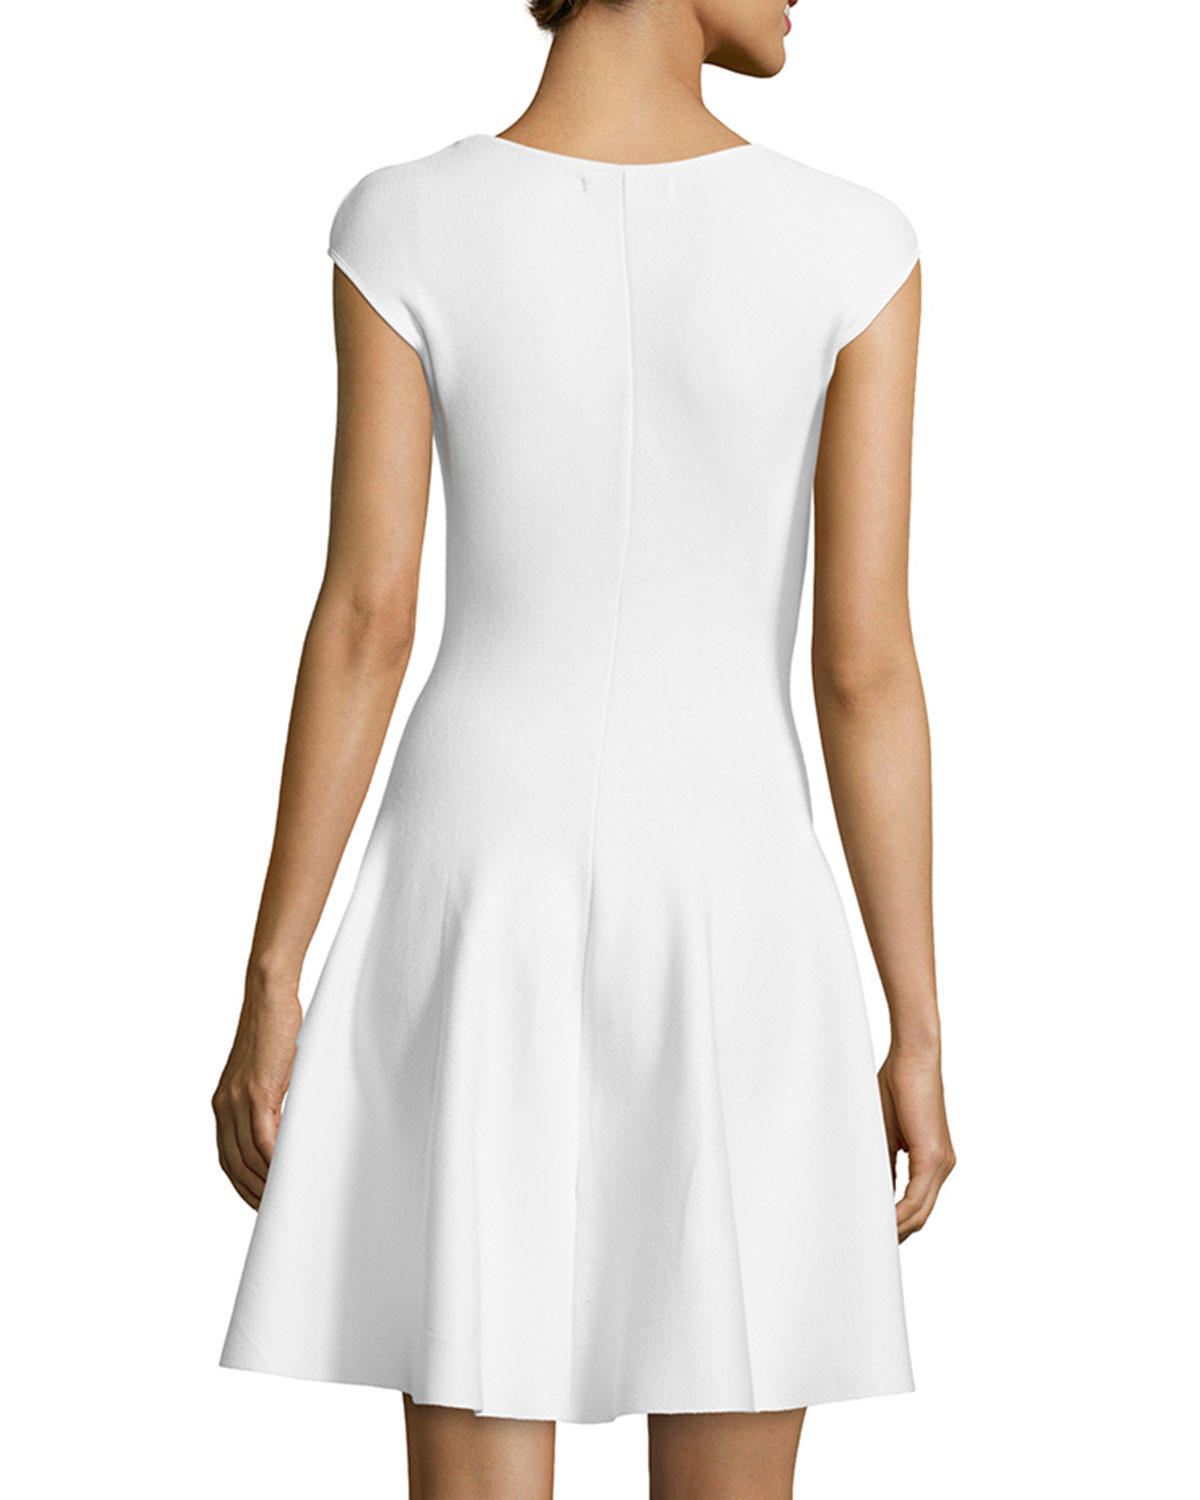 white fit and flare dress with sleeves